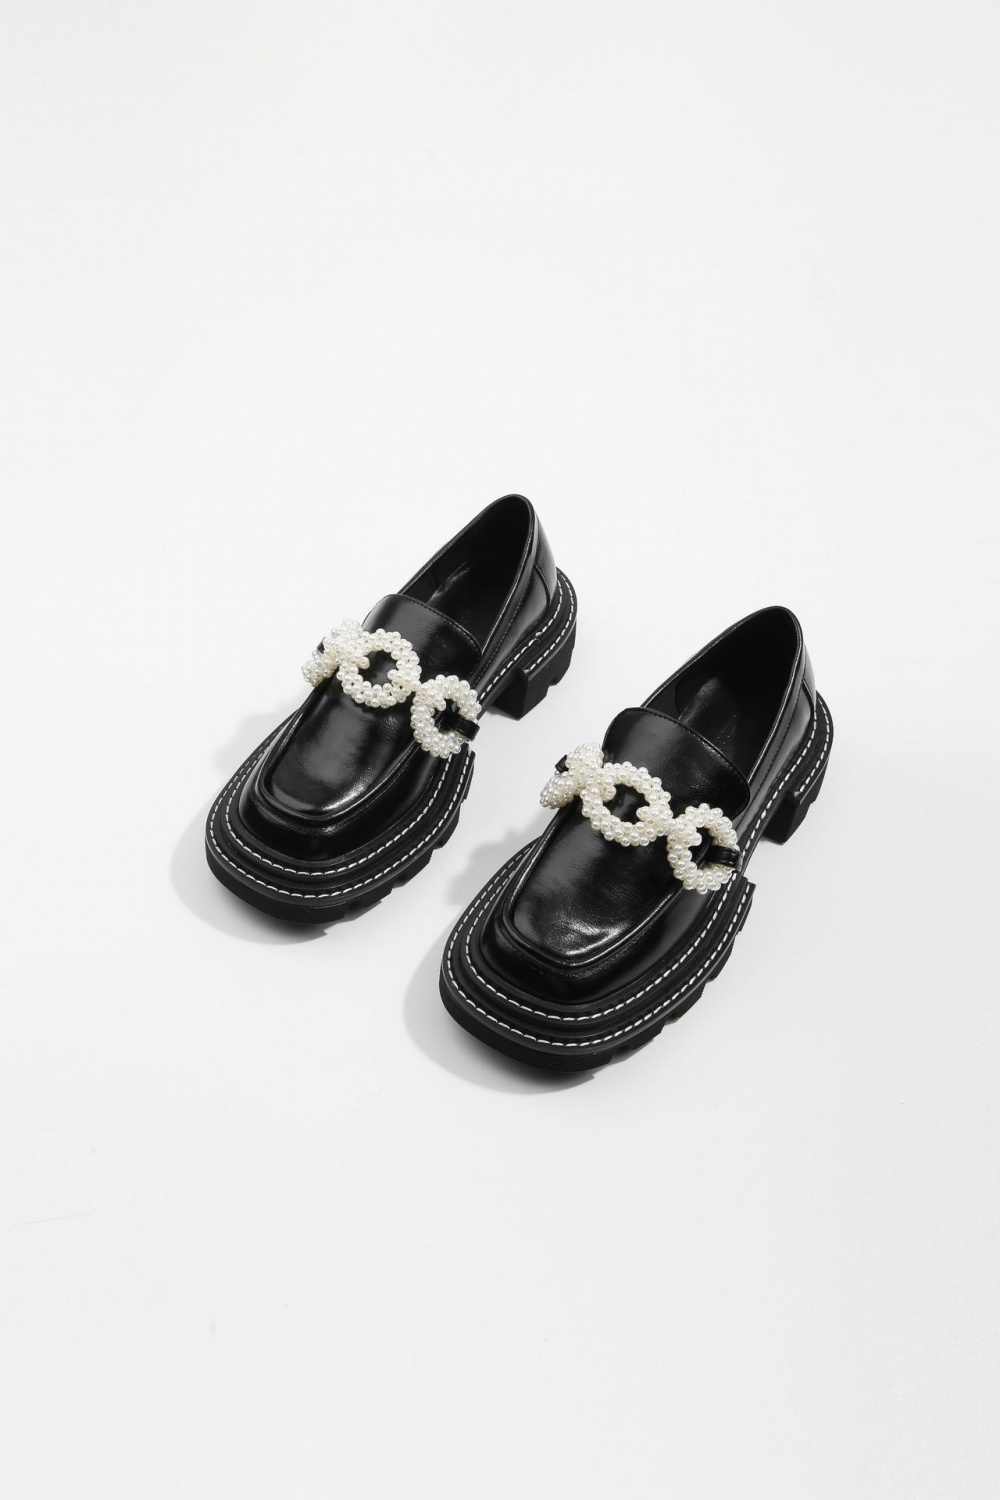 Buff fashion leather shoes pearl buckle uniform for women